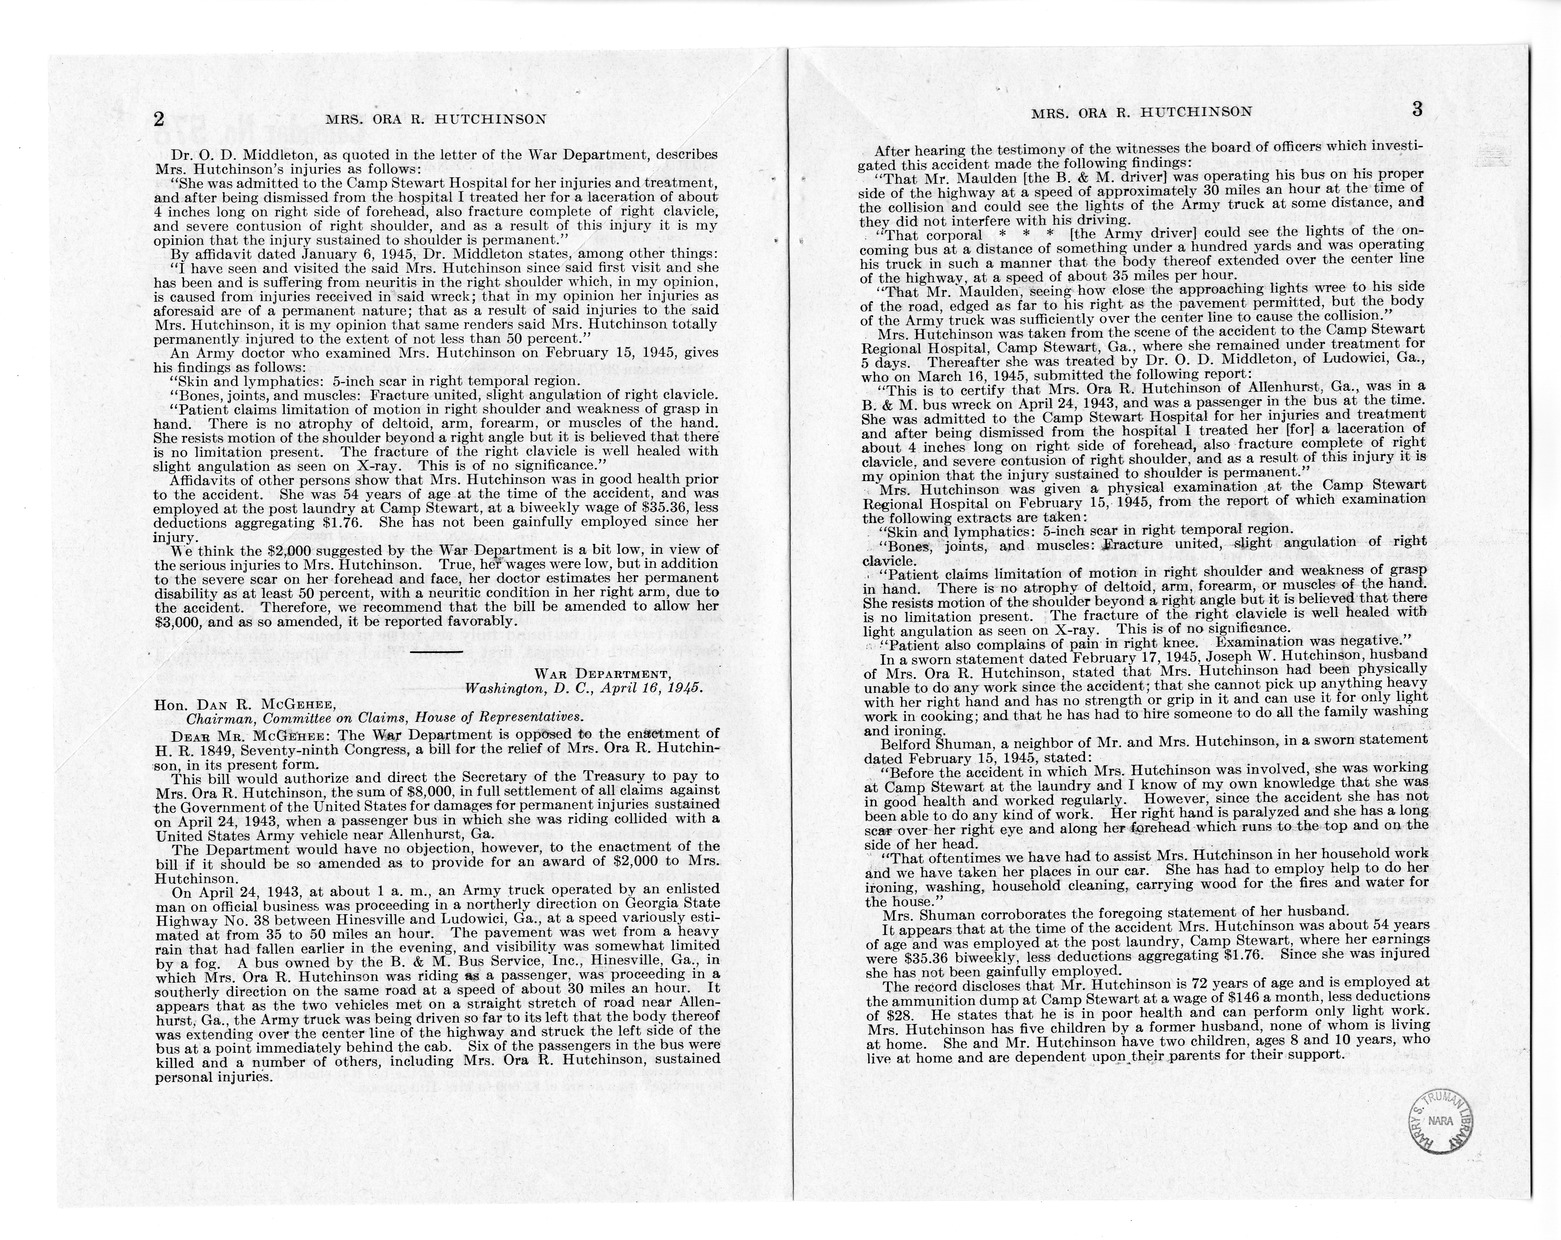 Memorandum from Frederick J. Bailey to M. C. Latta, H.R. 1849, For the Relief of Mrs. Ora R. Hutchinson, with Attachments